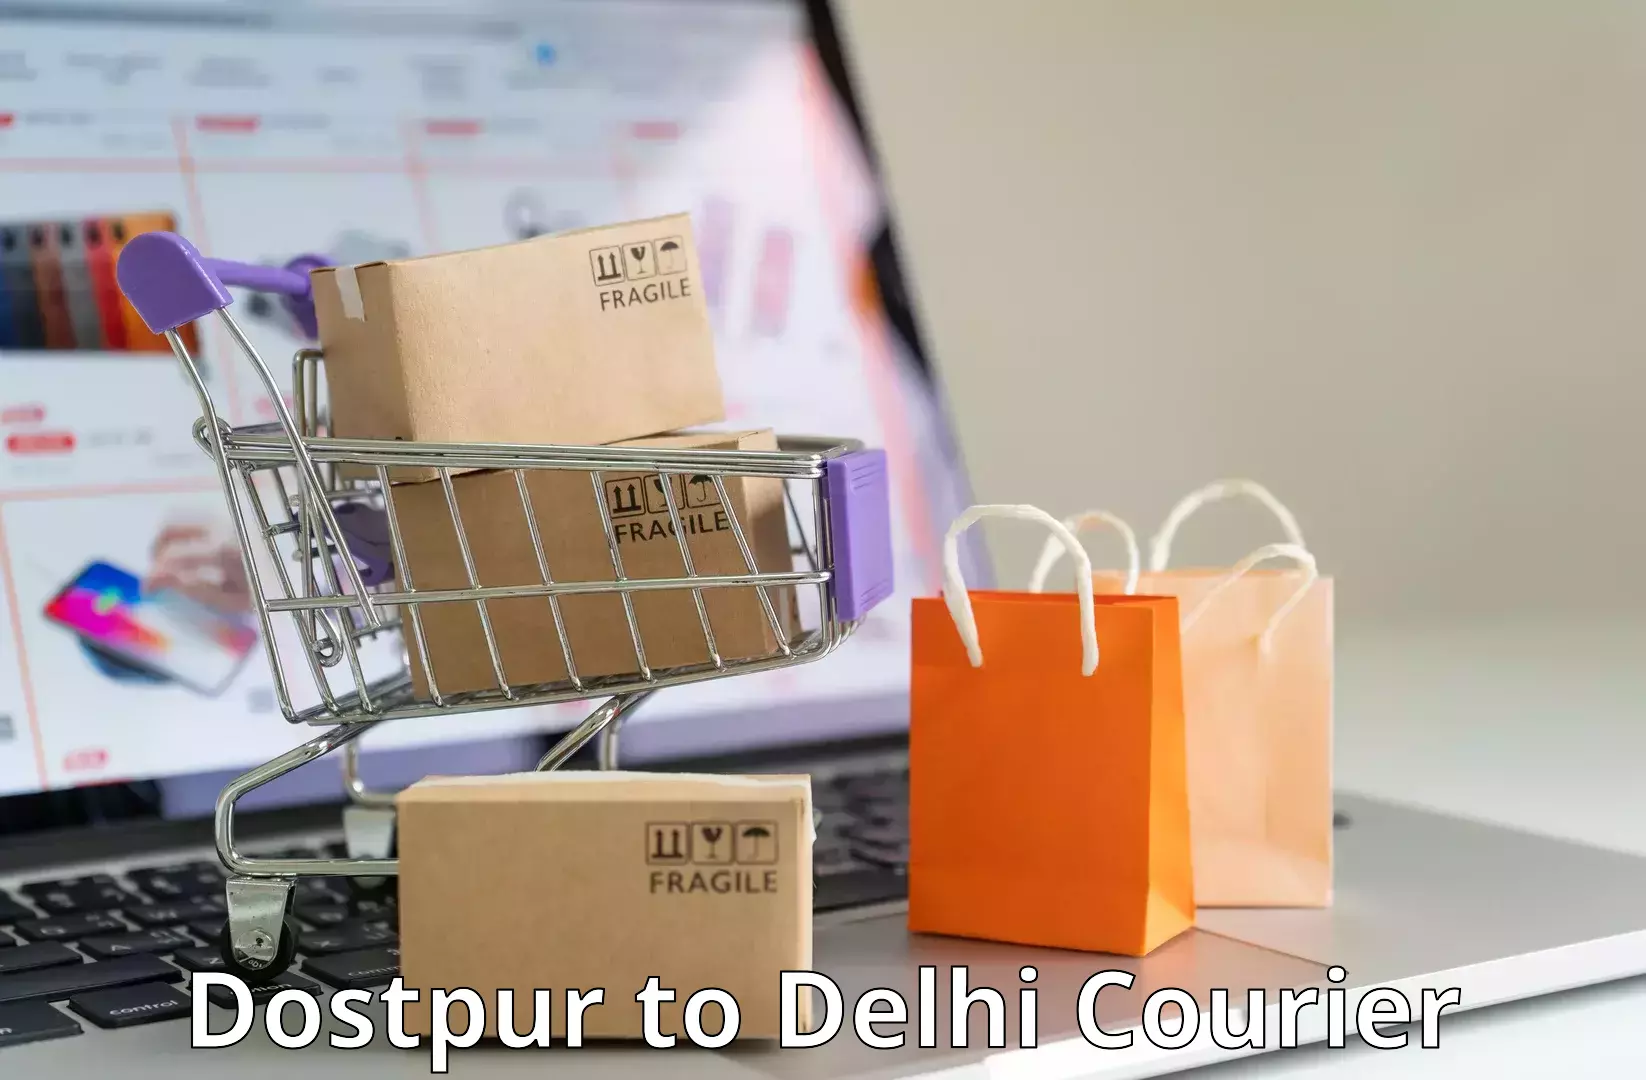 Express delivery network in Dostpur to East Delhi